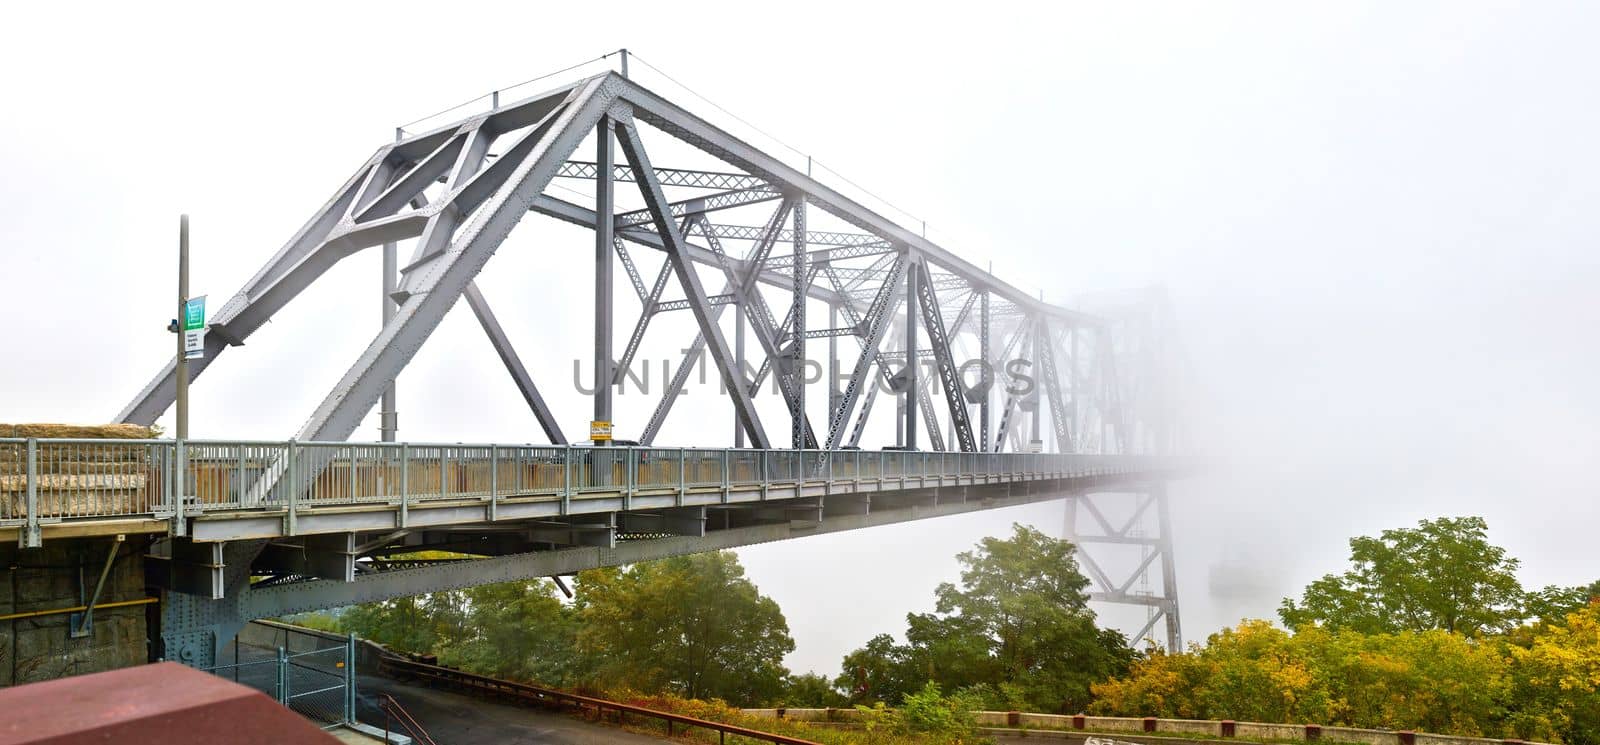 Panorama of full steel bridge in New York fading away into fog on foggy weather morning by njproductions